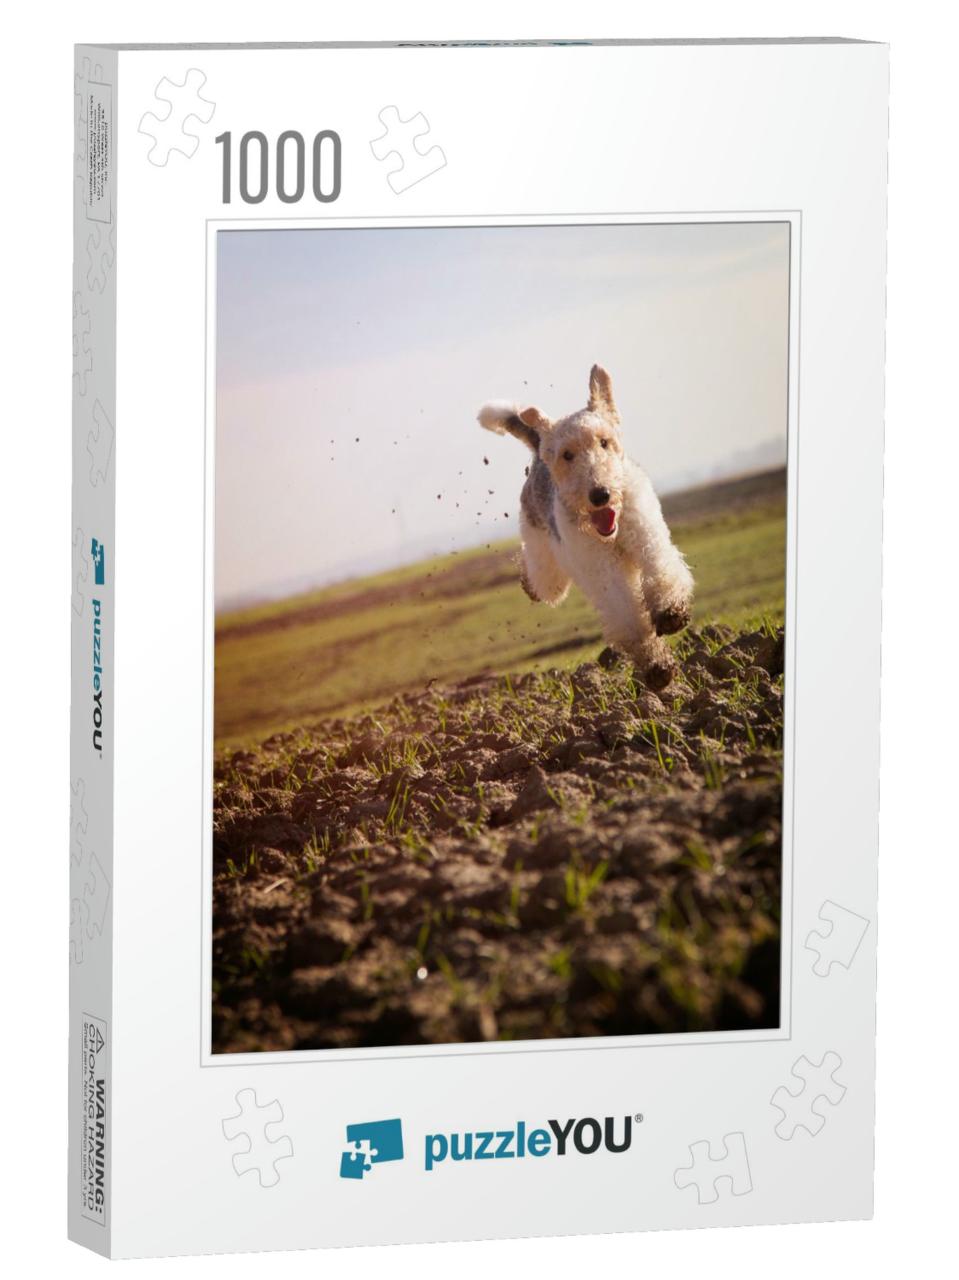 Wire Haired Fox Terrier Running Fast on Grass Ku. Fox Ter... Jigsaw Puzzle with 1000 pieces